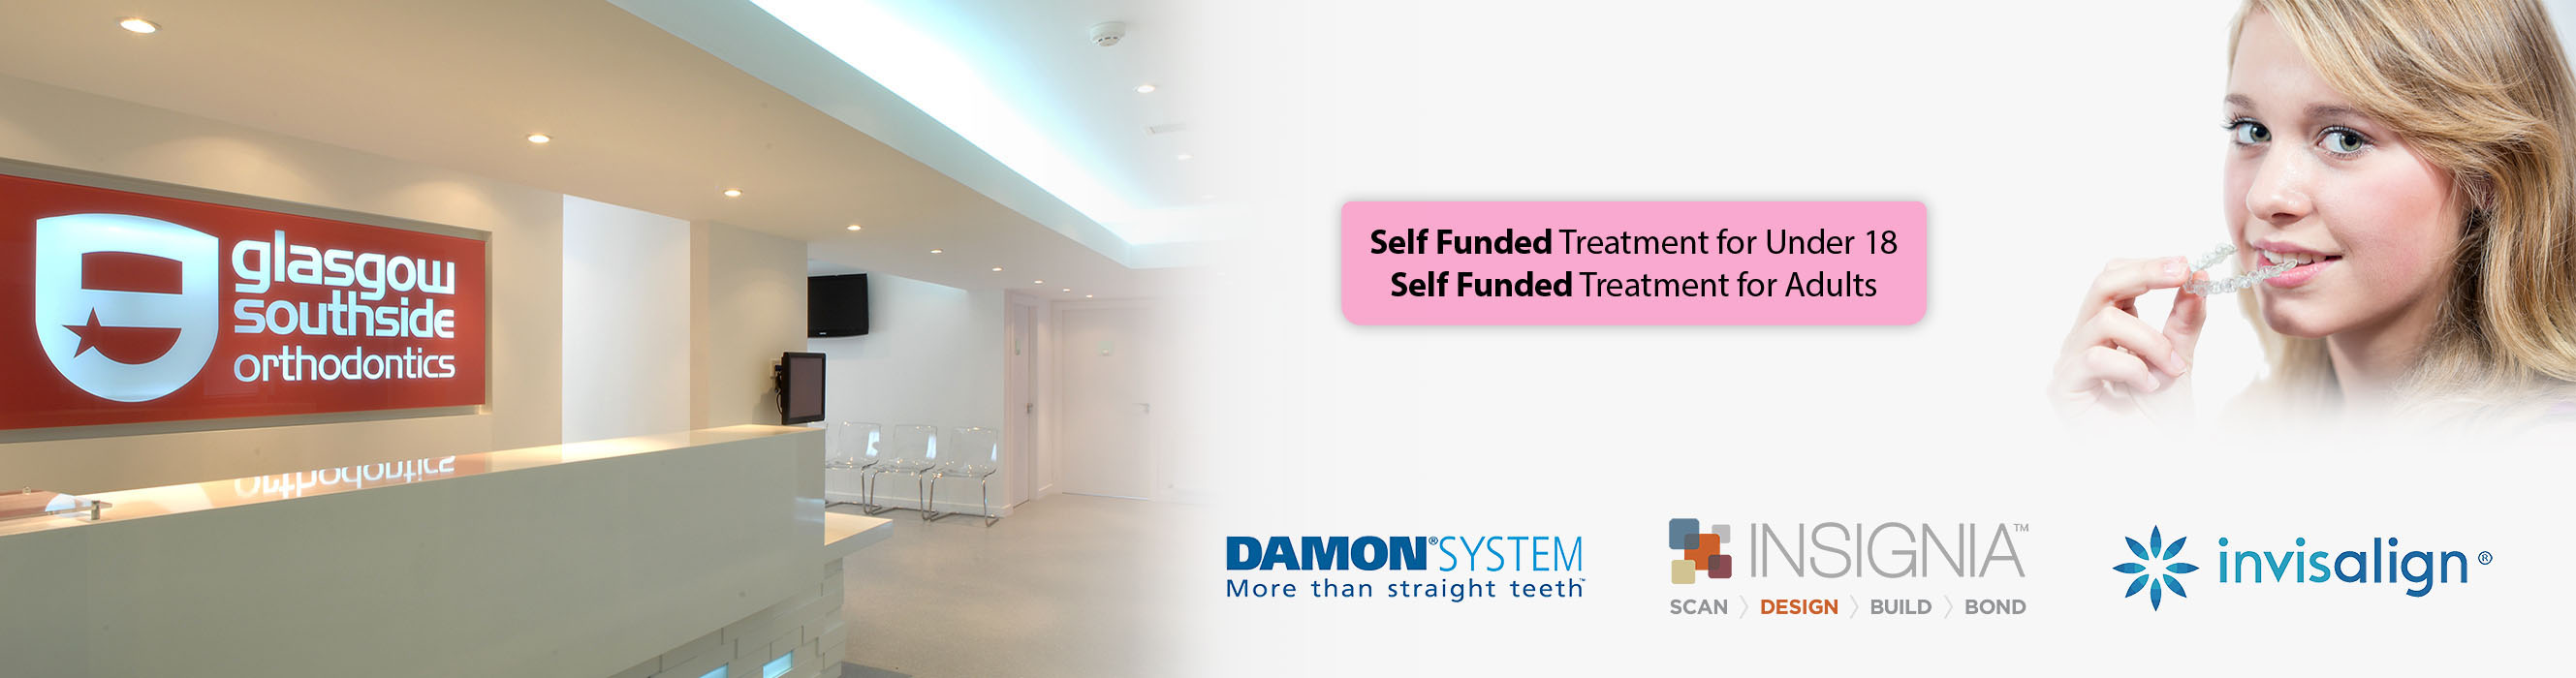 Self Funded Treatments